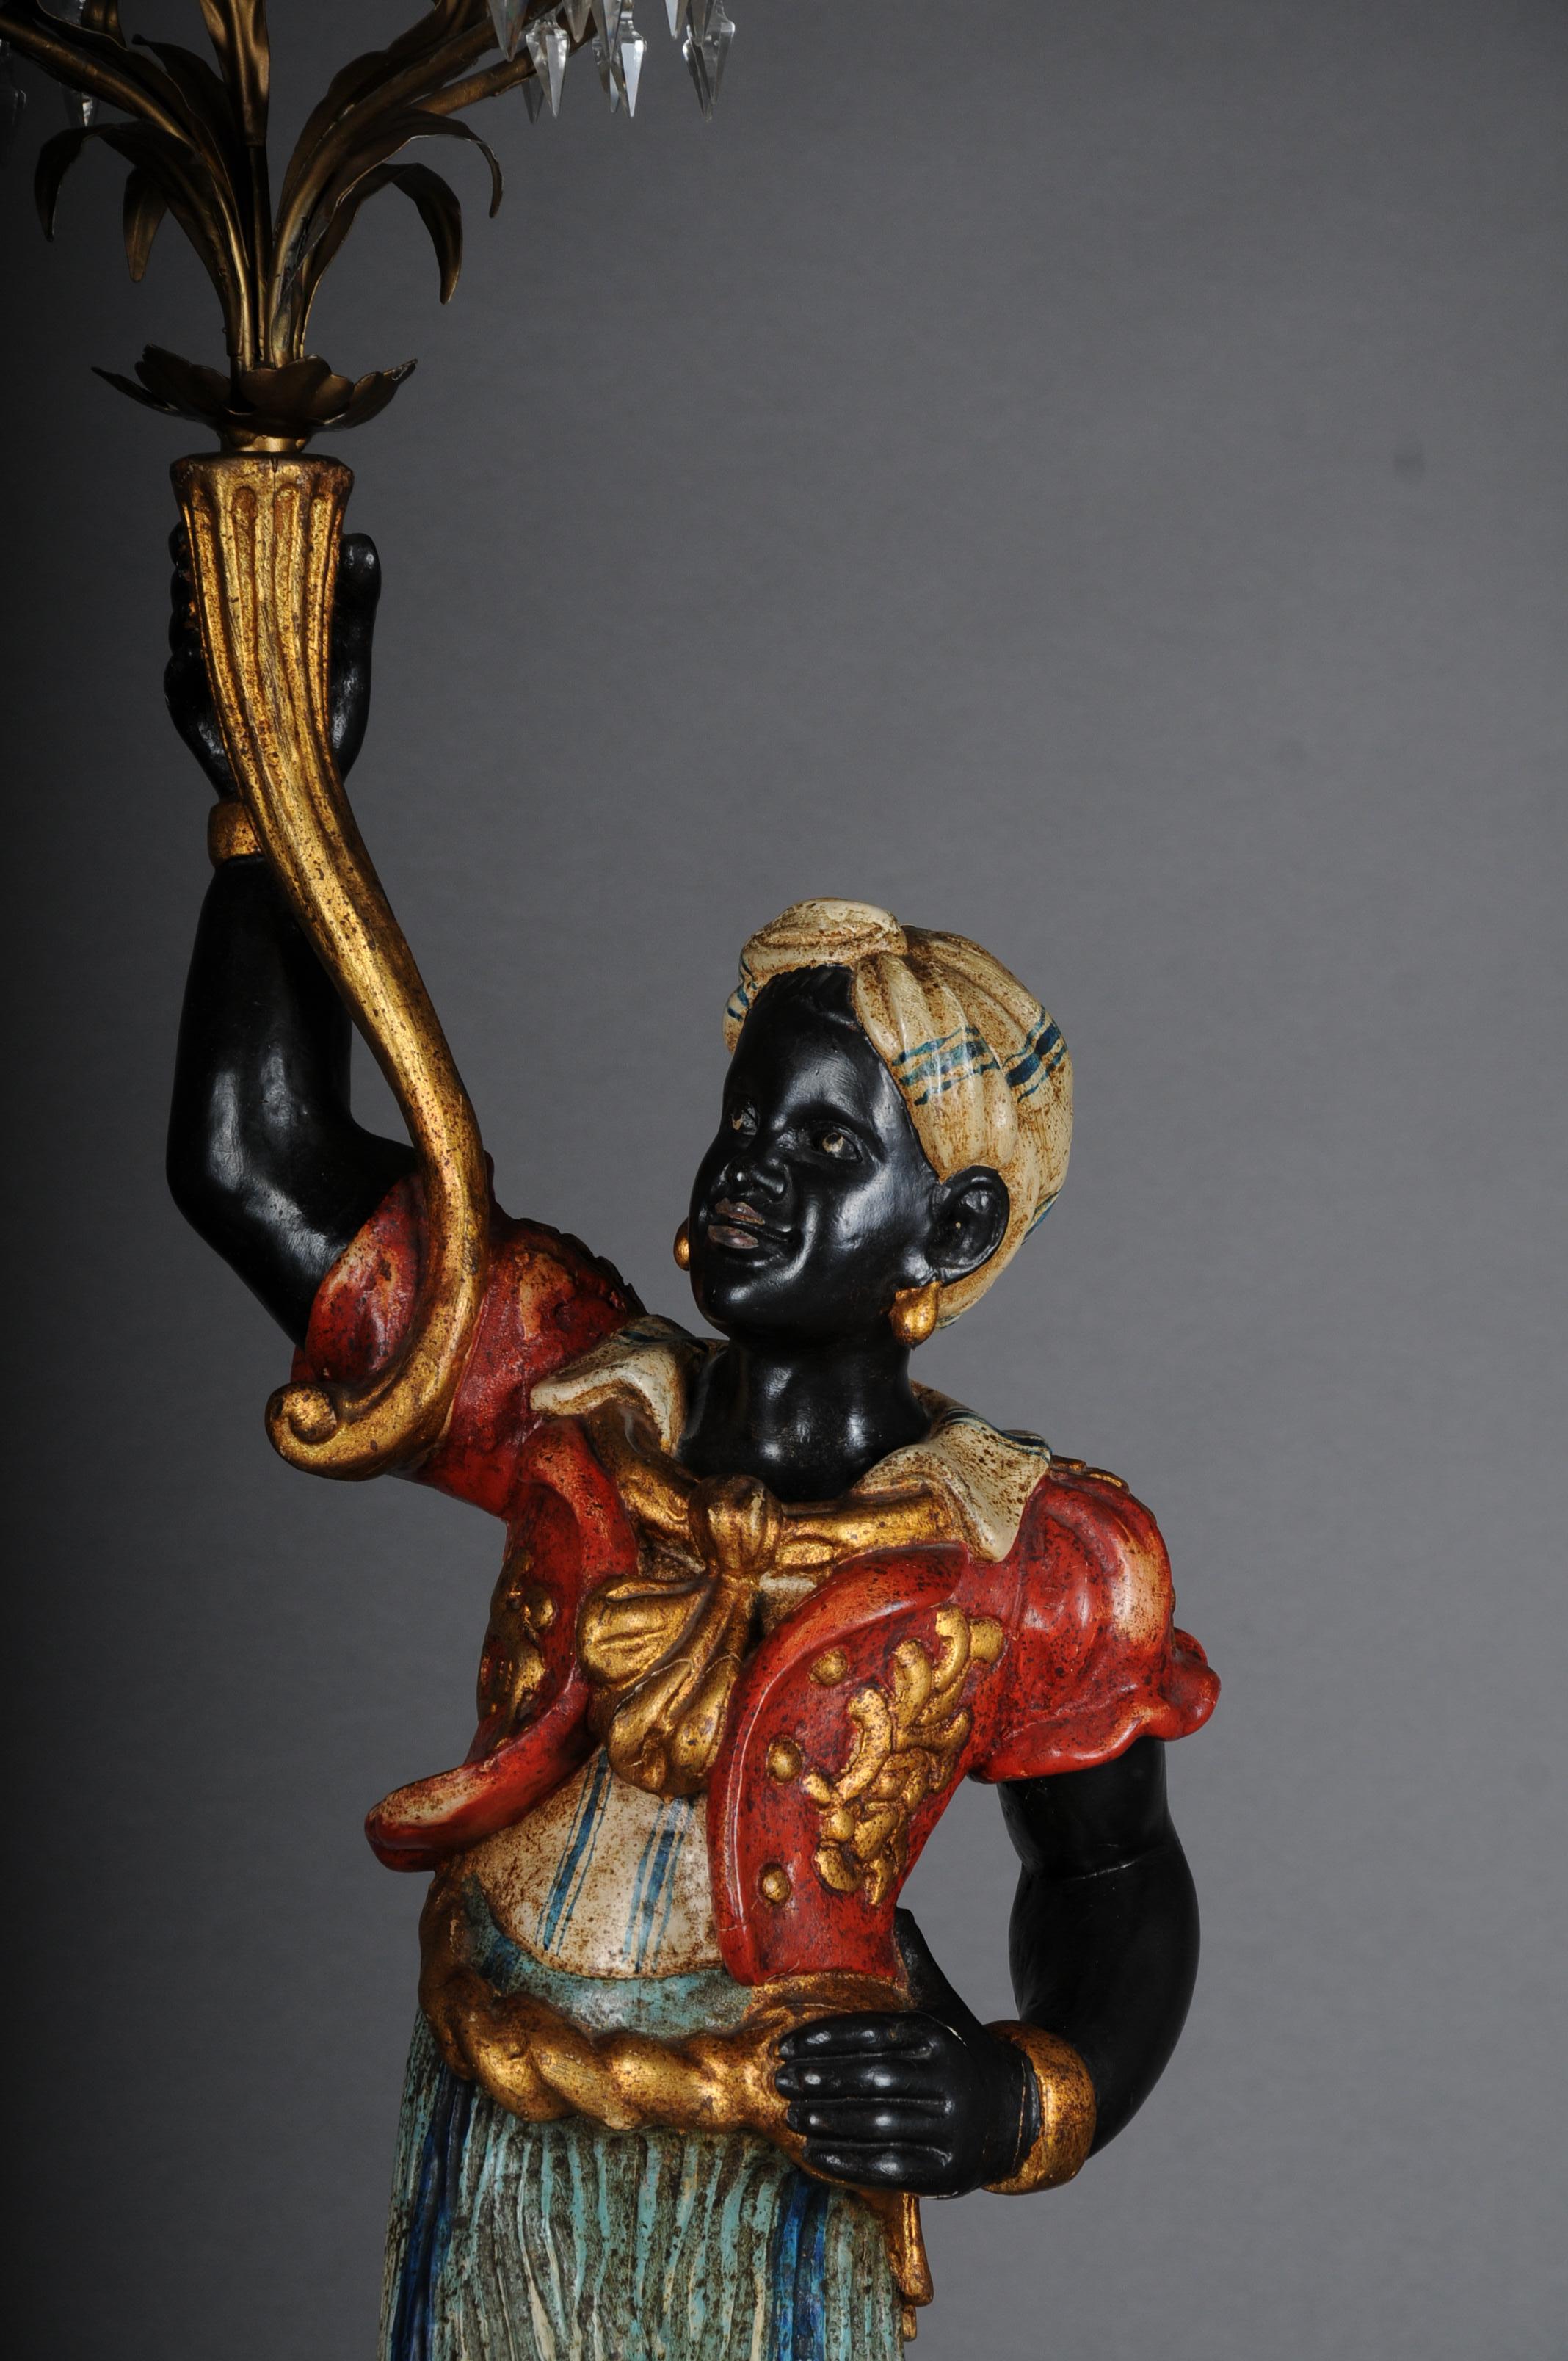 Venetian-style moroccan chandelier with an oriental woman.

Wood/stucco painted In the right hand holding a cornucopia with a 5-flame candlestick. 20th century measure: H. 180 cm. Electrified.